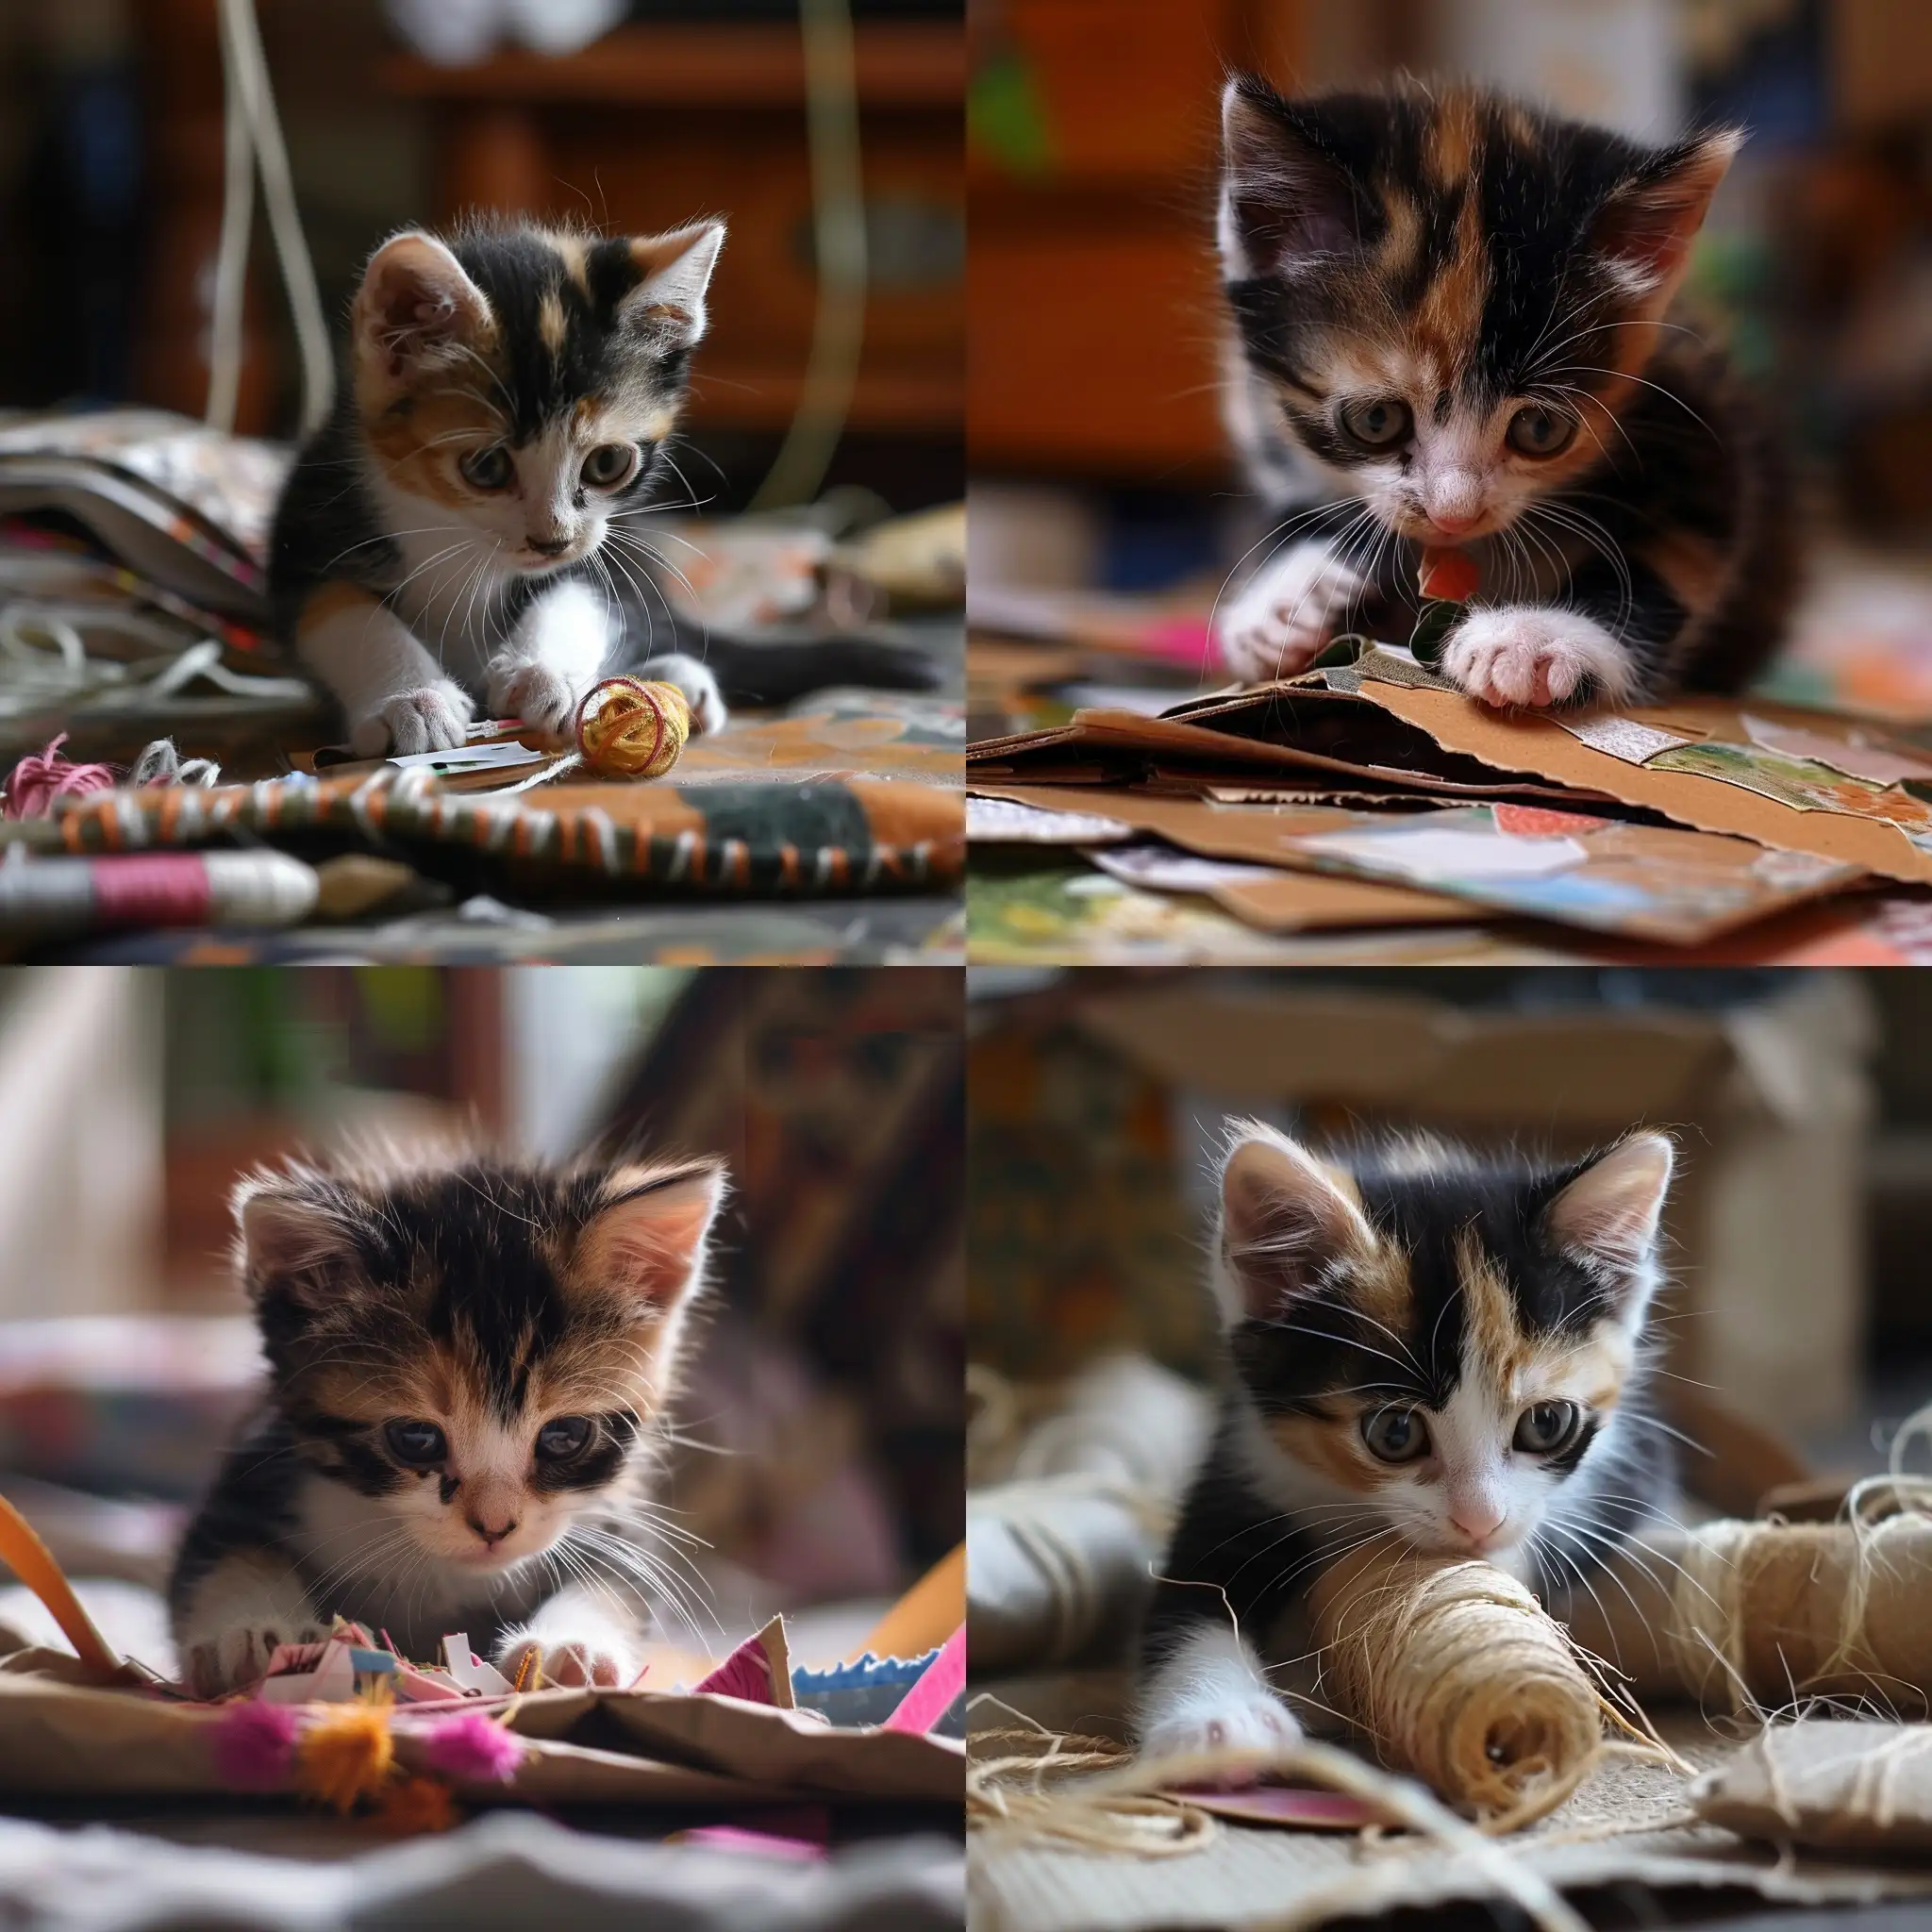 small calico kitten working on a craft project